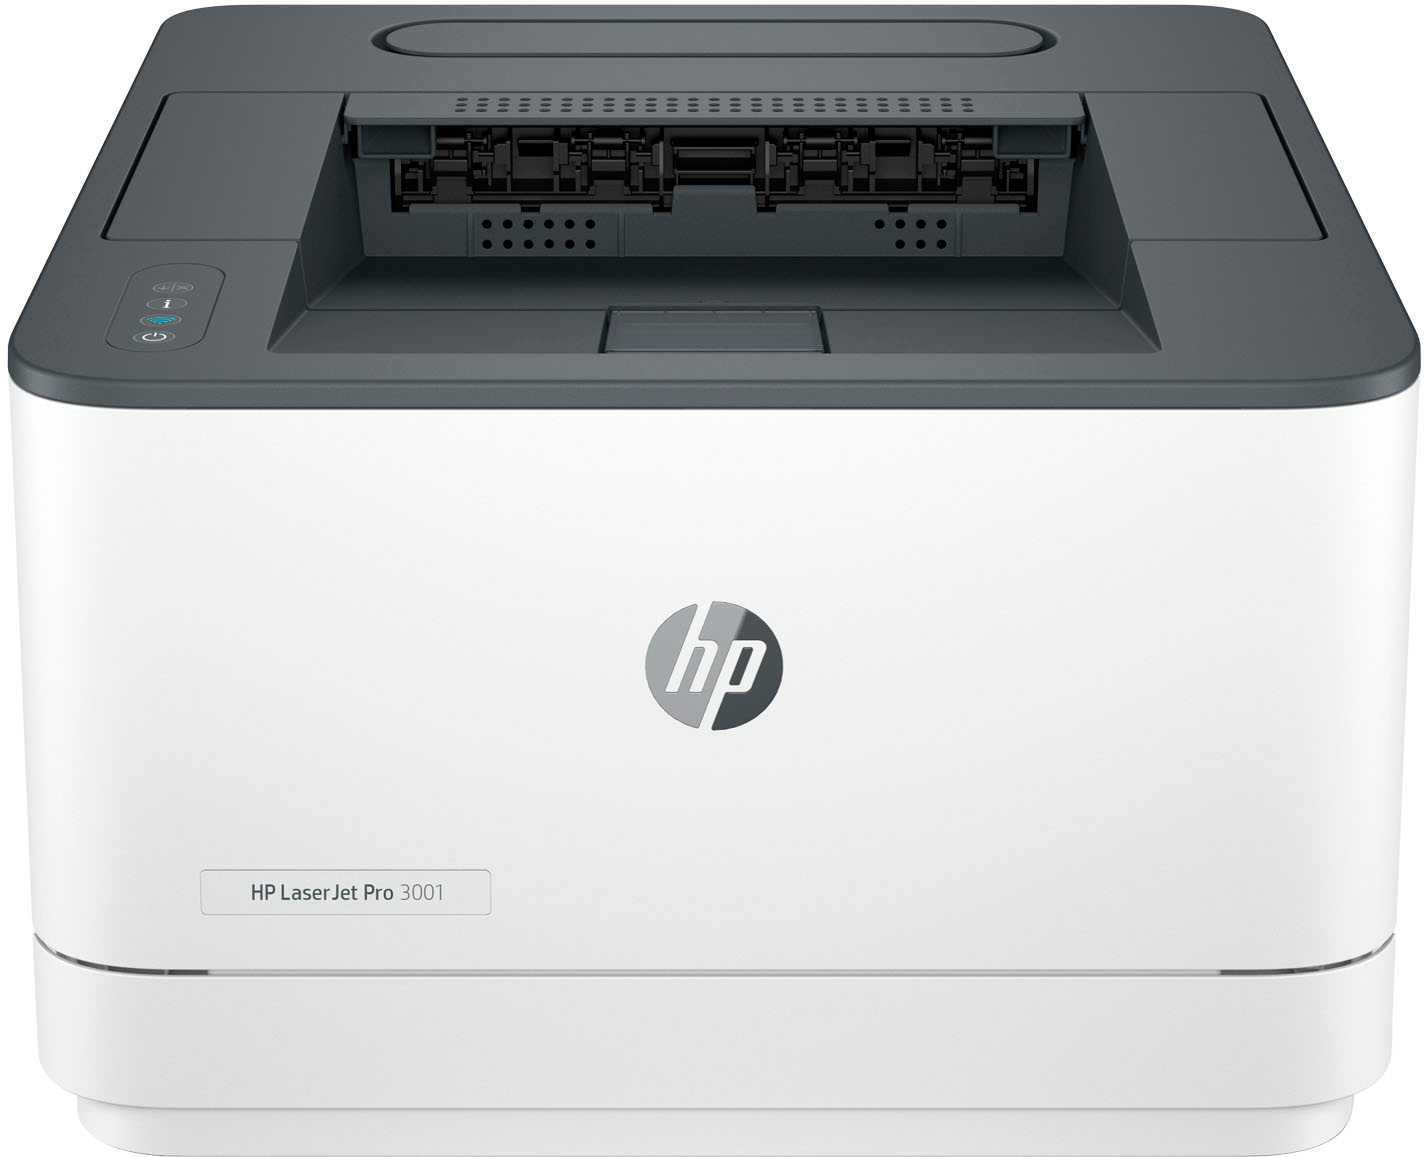 LaserJet Pro Wireless Black-and-White Laser Printer with 3 months of Instant Ink included with HP+ White Pro 3001dwe - Best Buy